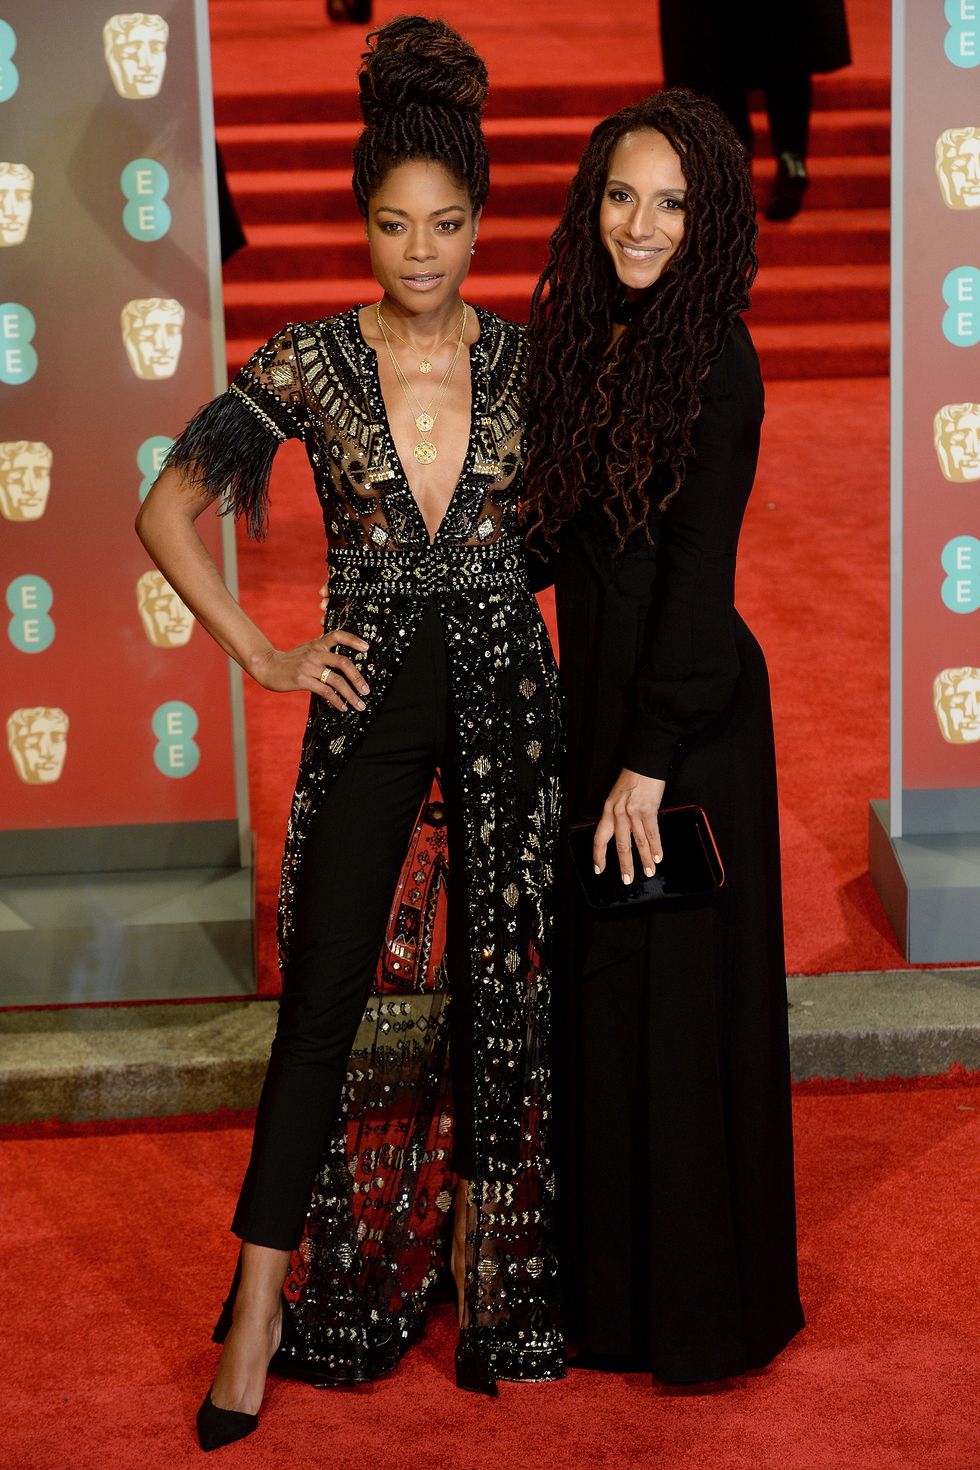 Baftas red carpet - activists and leaders